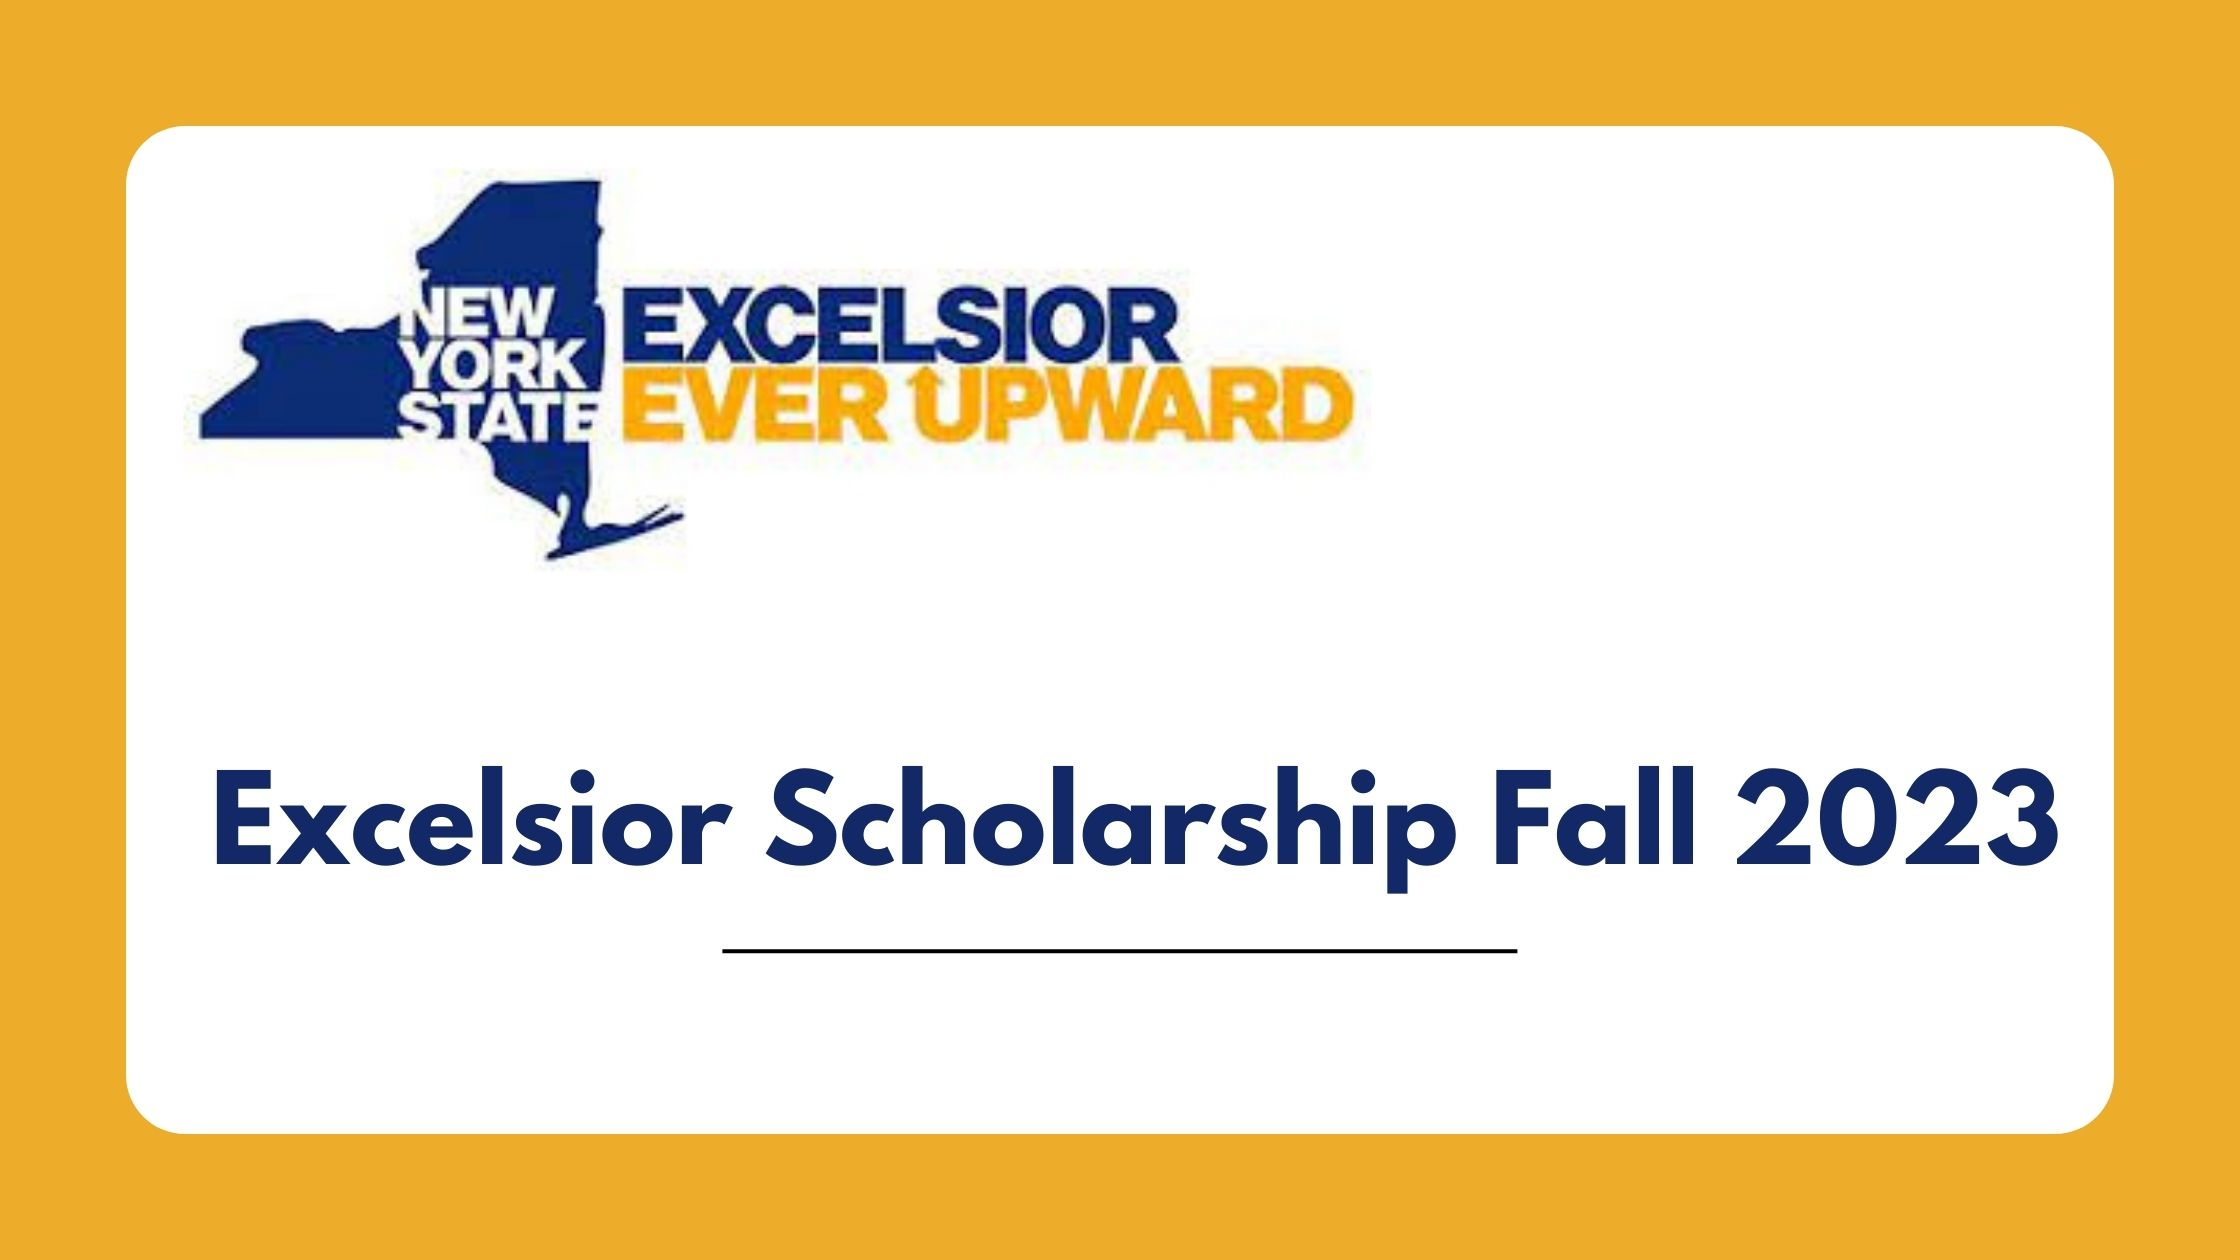 Excelsior Scholarship Fall 2023